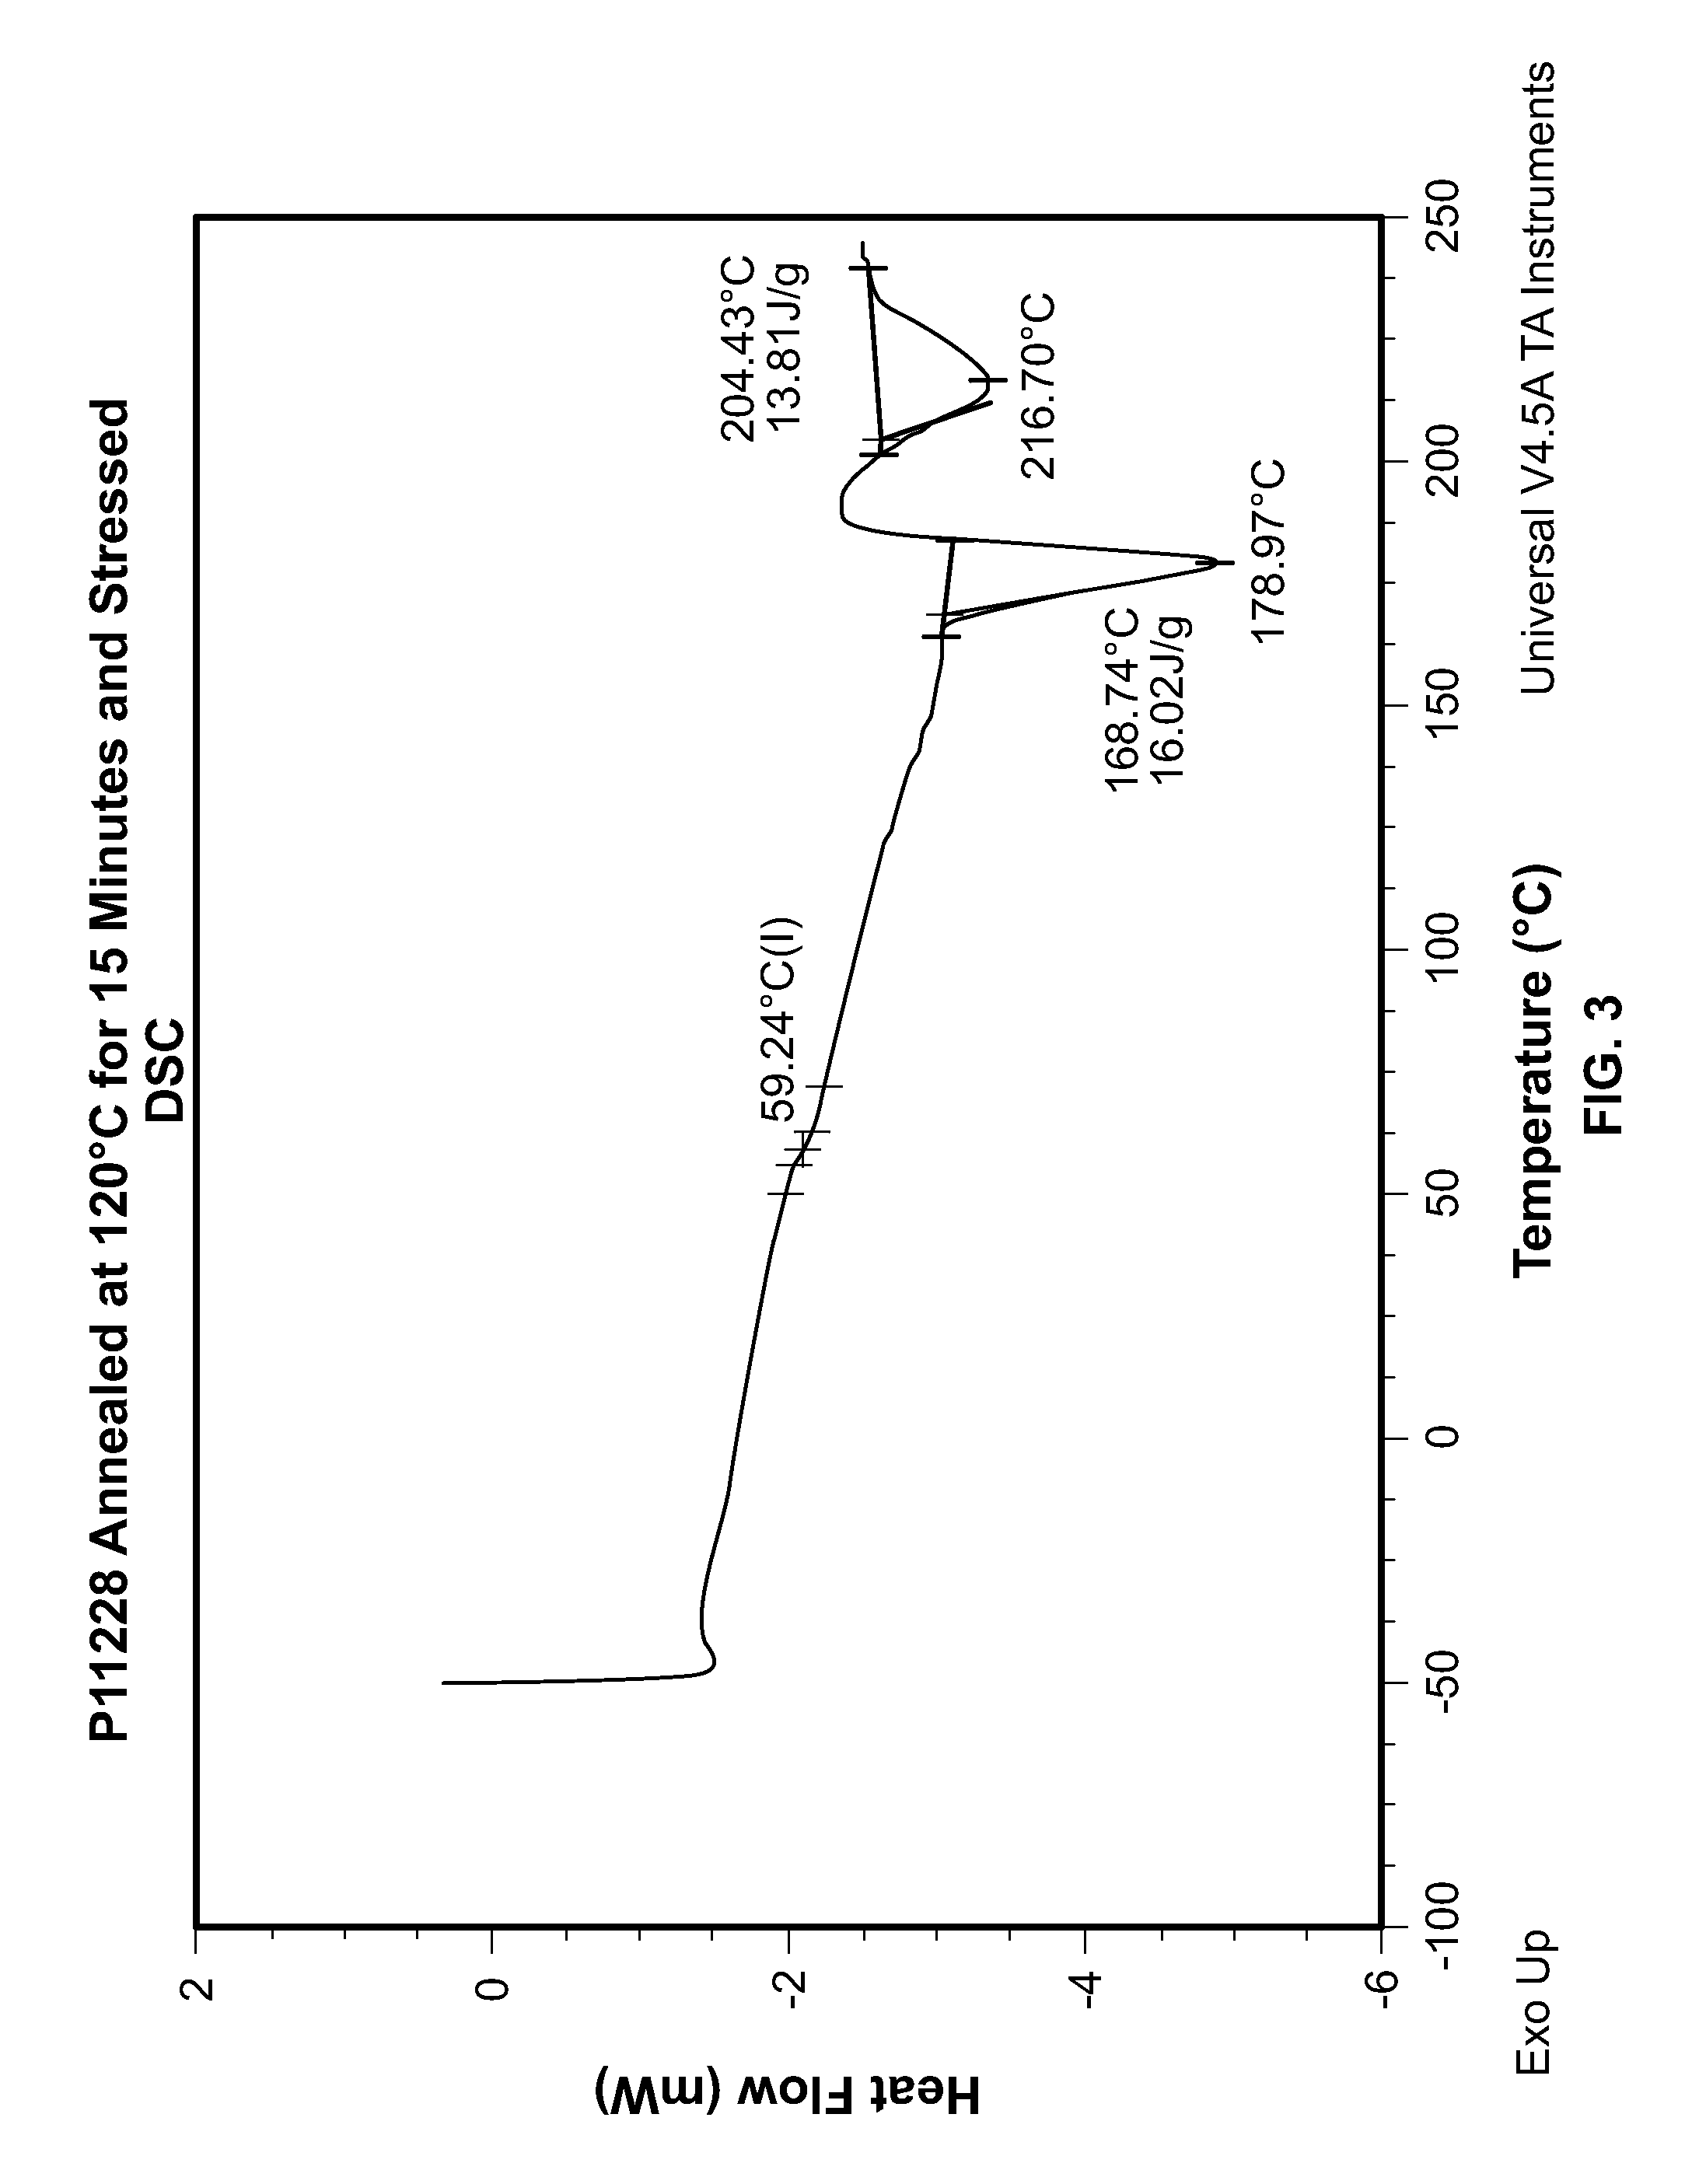 Bioabsorbable Polymeric Compositions and Medical Devices